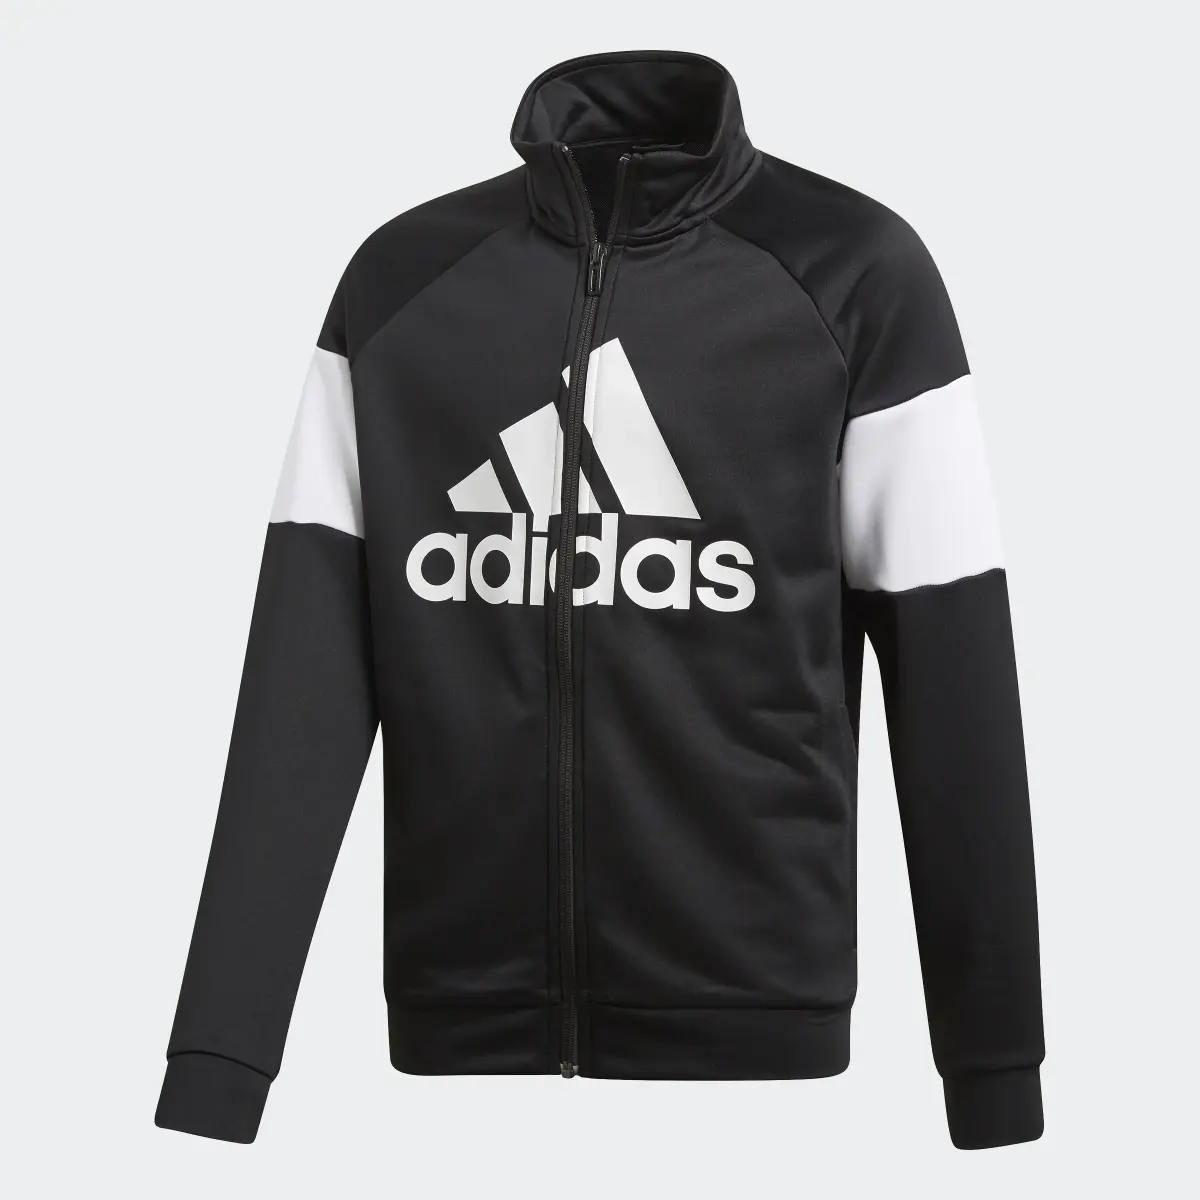 Adidas Badge of Sport Track Suit. 2